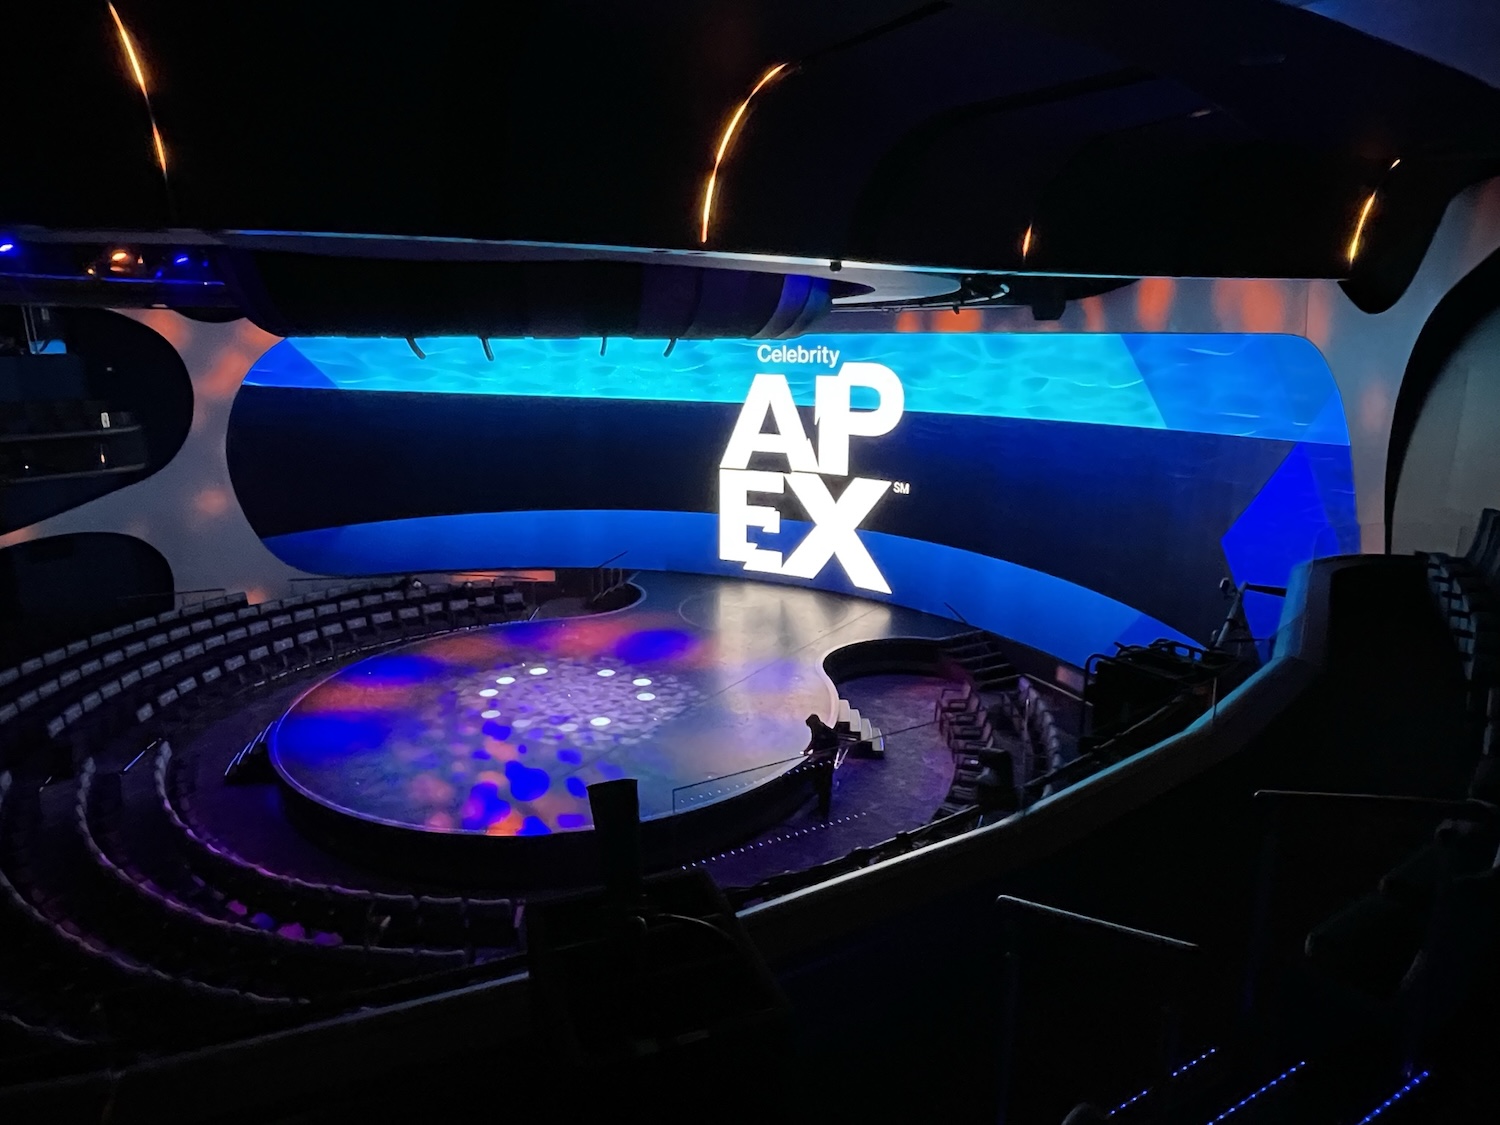 A modern theater setting with blue lighting, featuring the word 'APEX' on a large screen, with a circular stage and tiered seating.